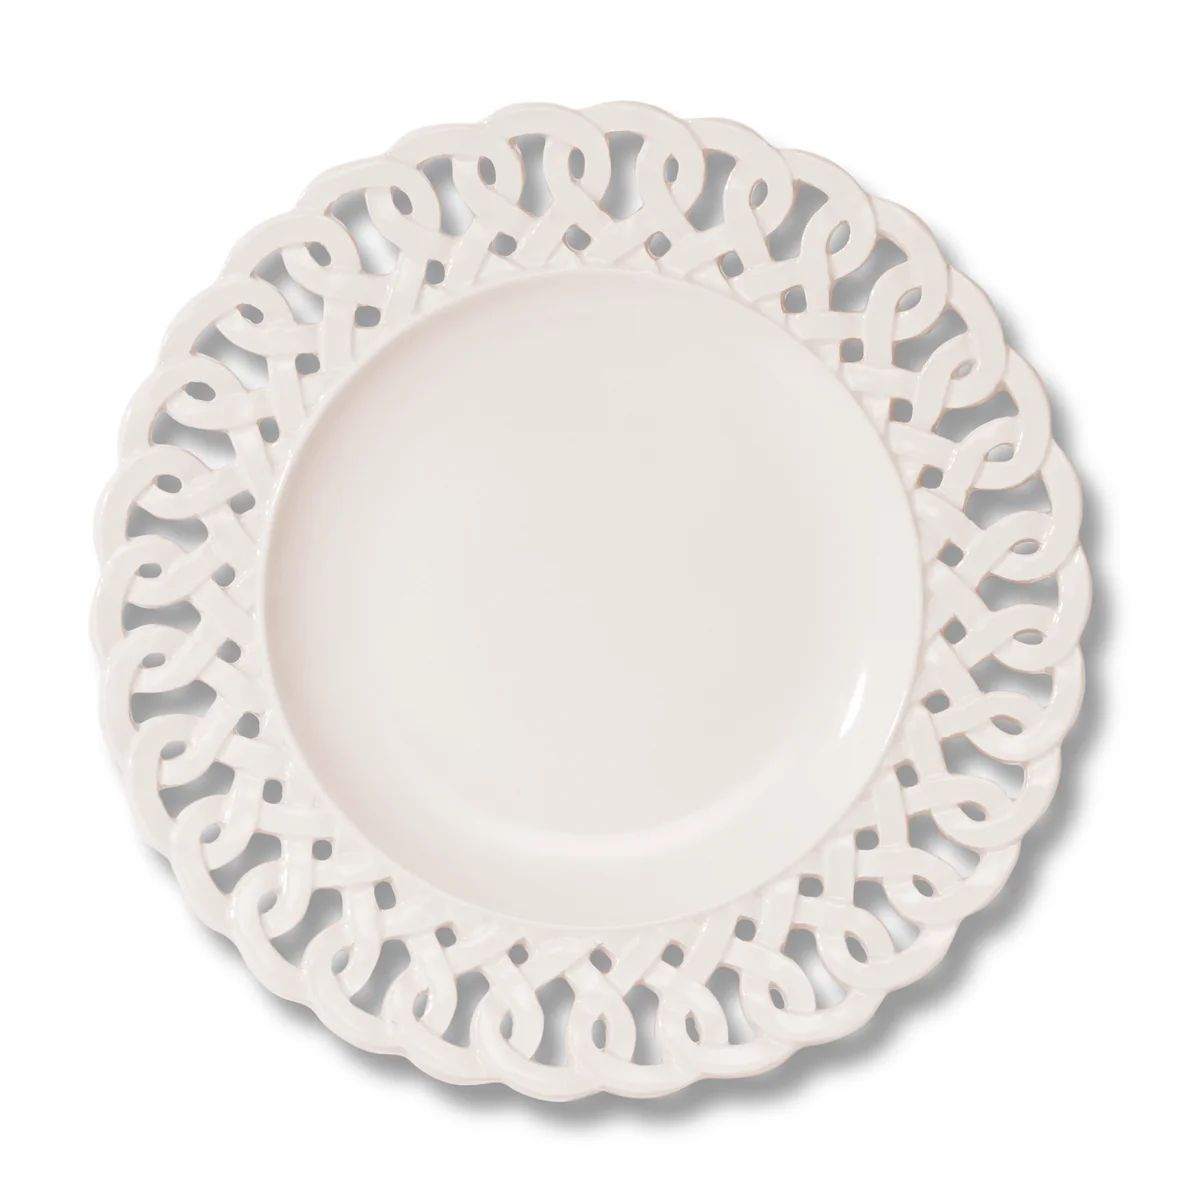 Paulette Bread Plate White | Over The Moon